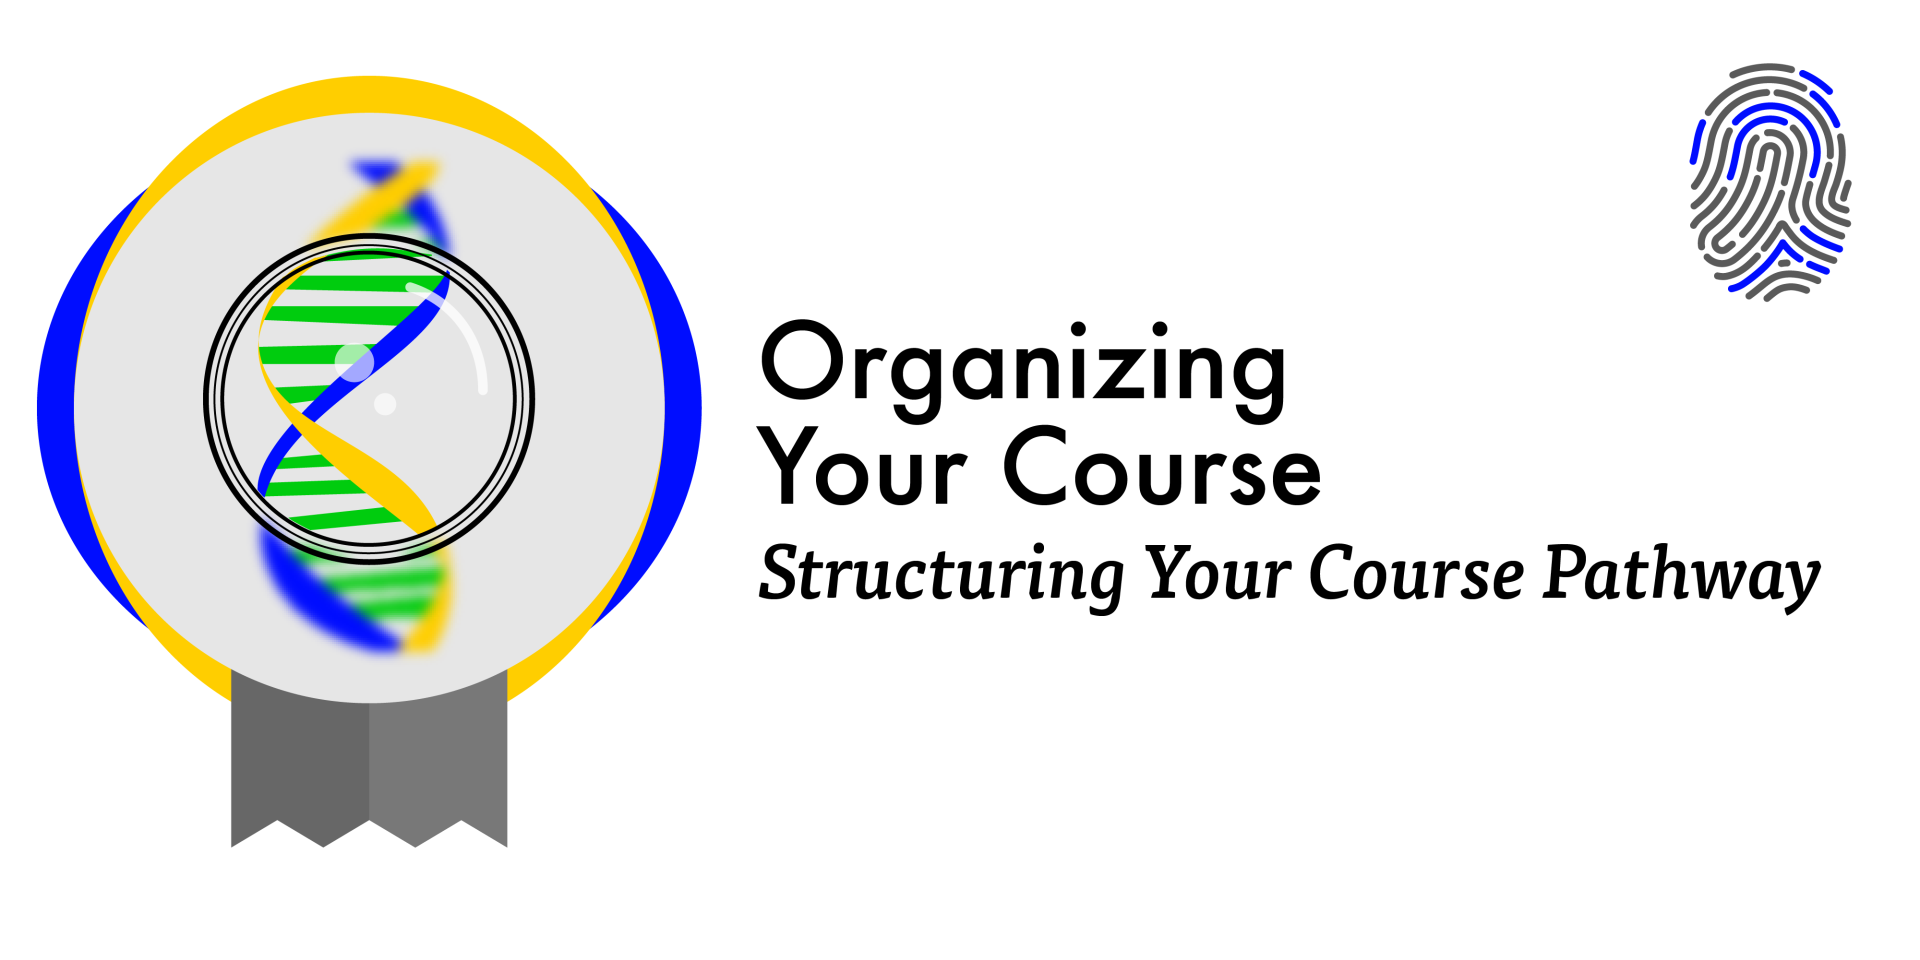 Organizing Your Course, Structuring Your Course Pathway